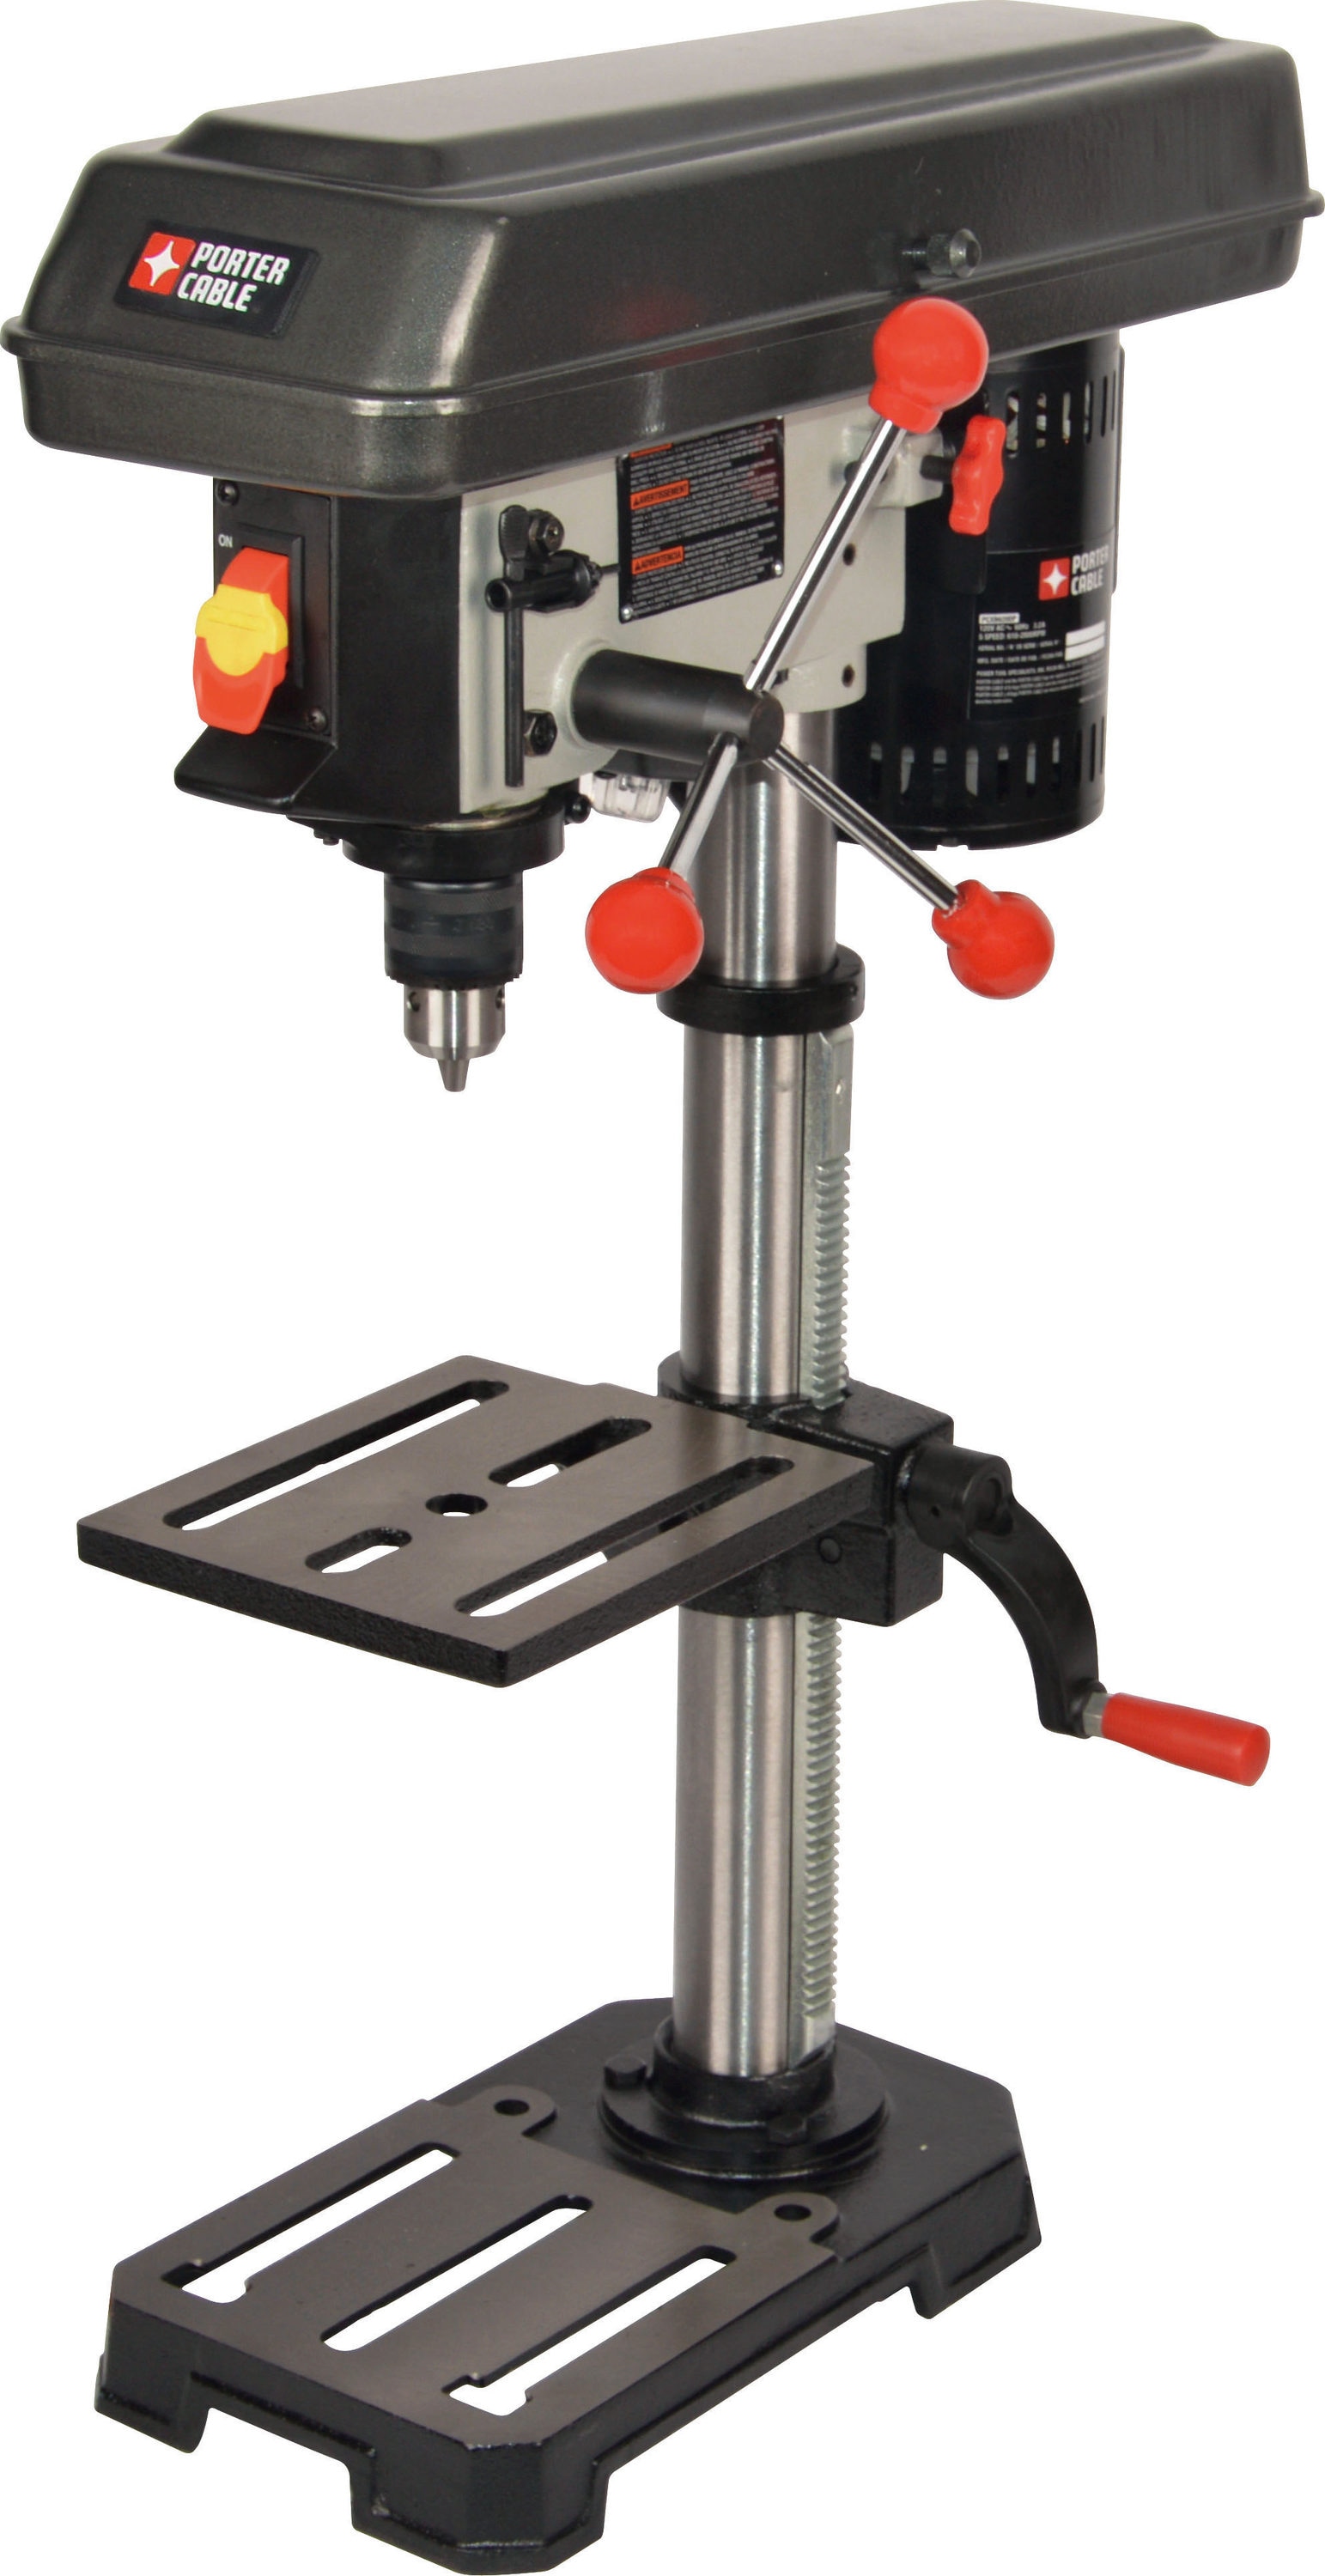 how many amps does a drill press use?